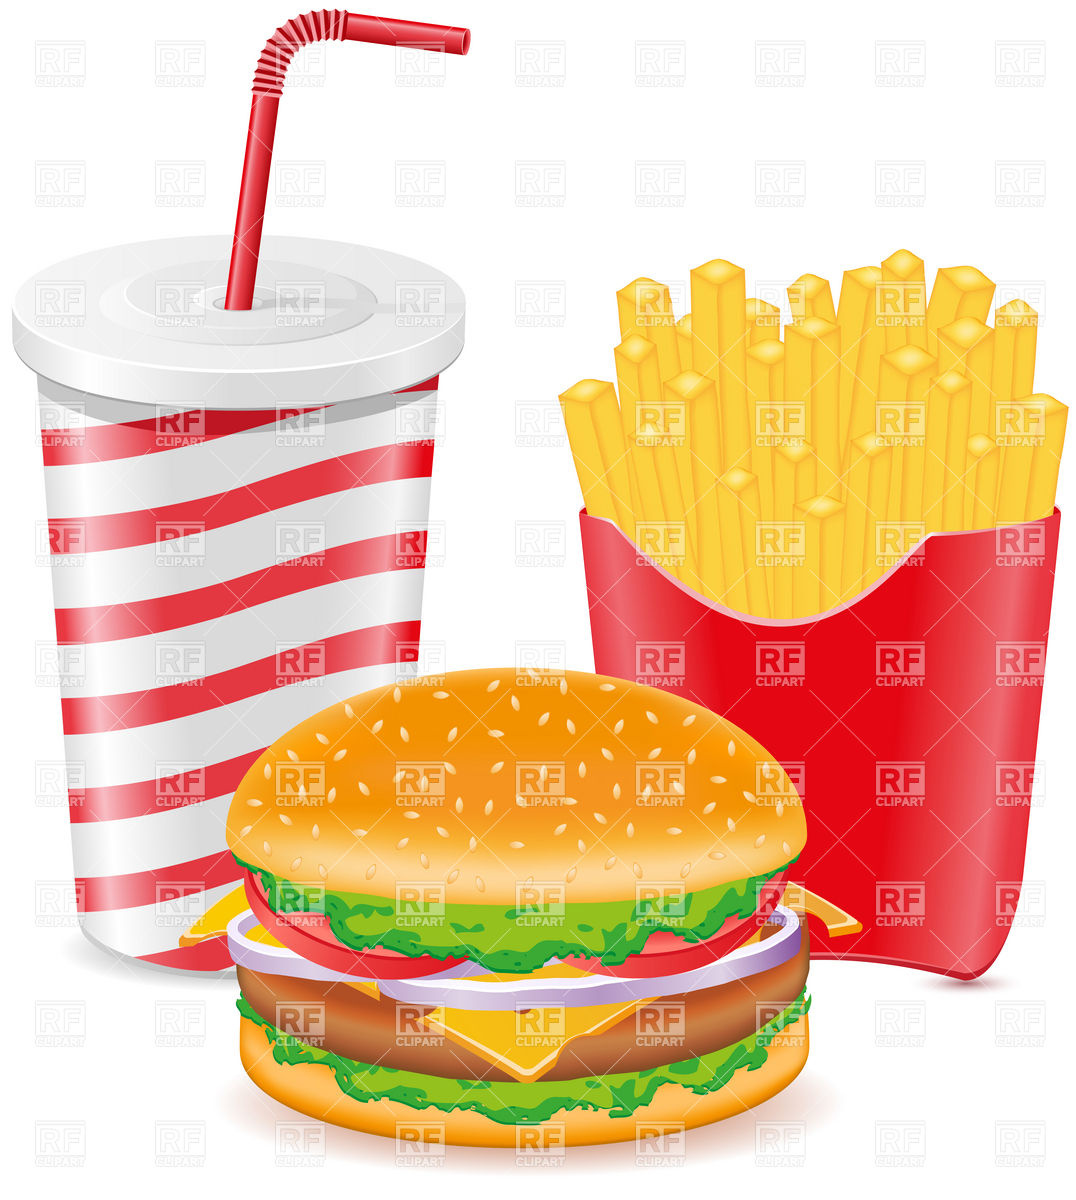 Cheeseburger Fries Potato And Soda Paper Cup With Straw 19227 Food